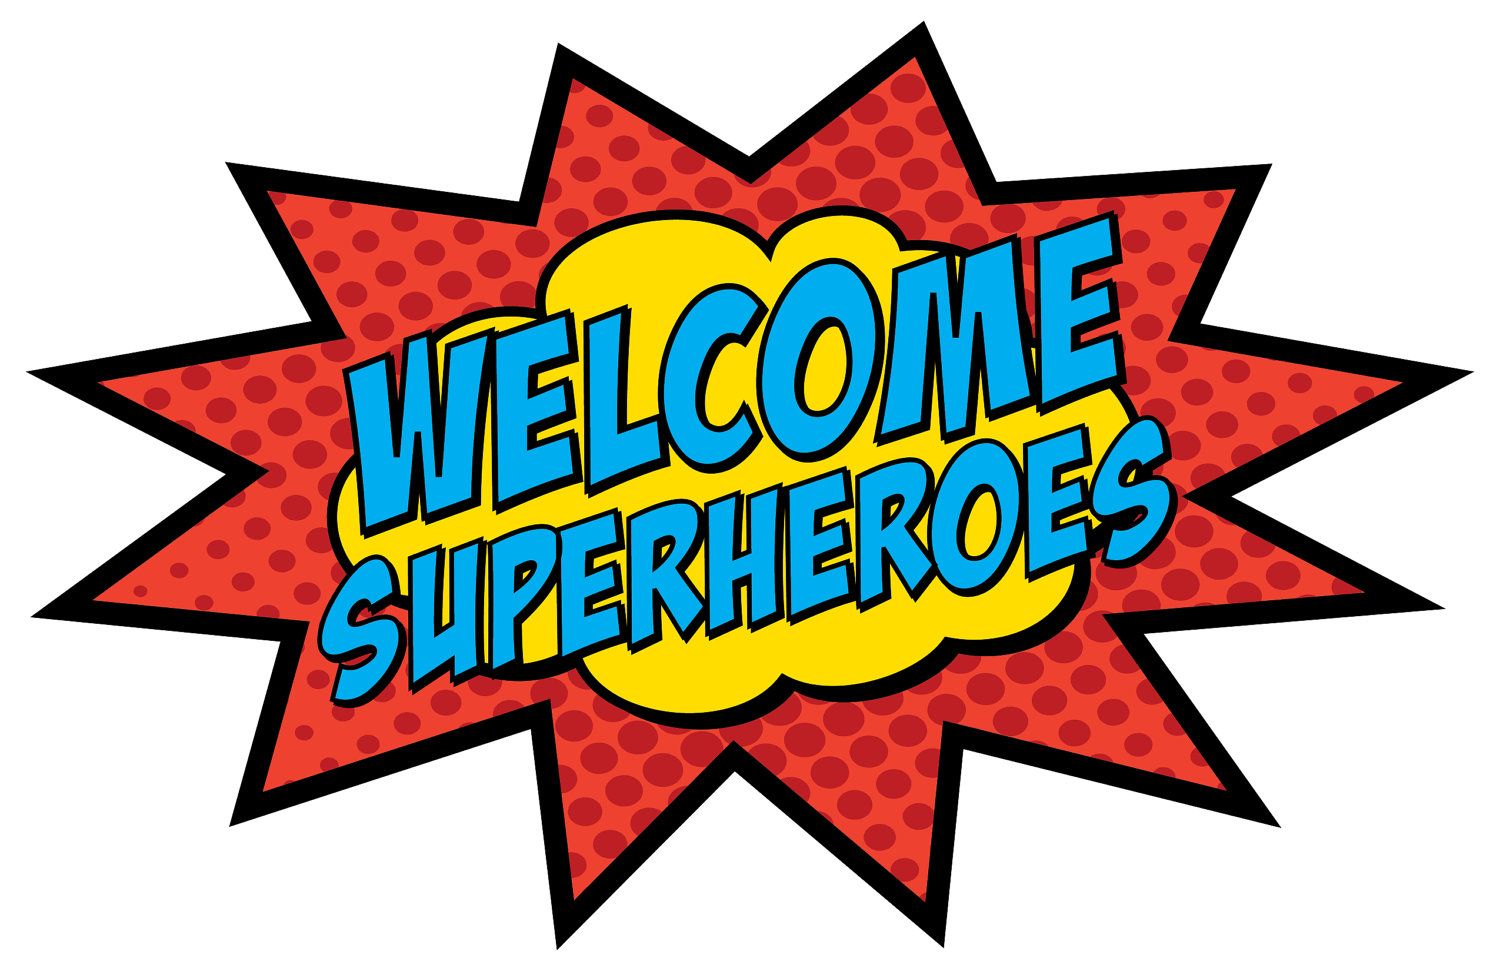 Welcome superheroes sign.